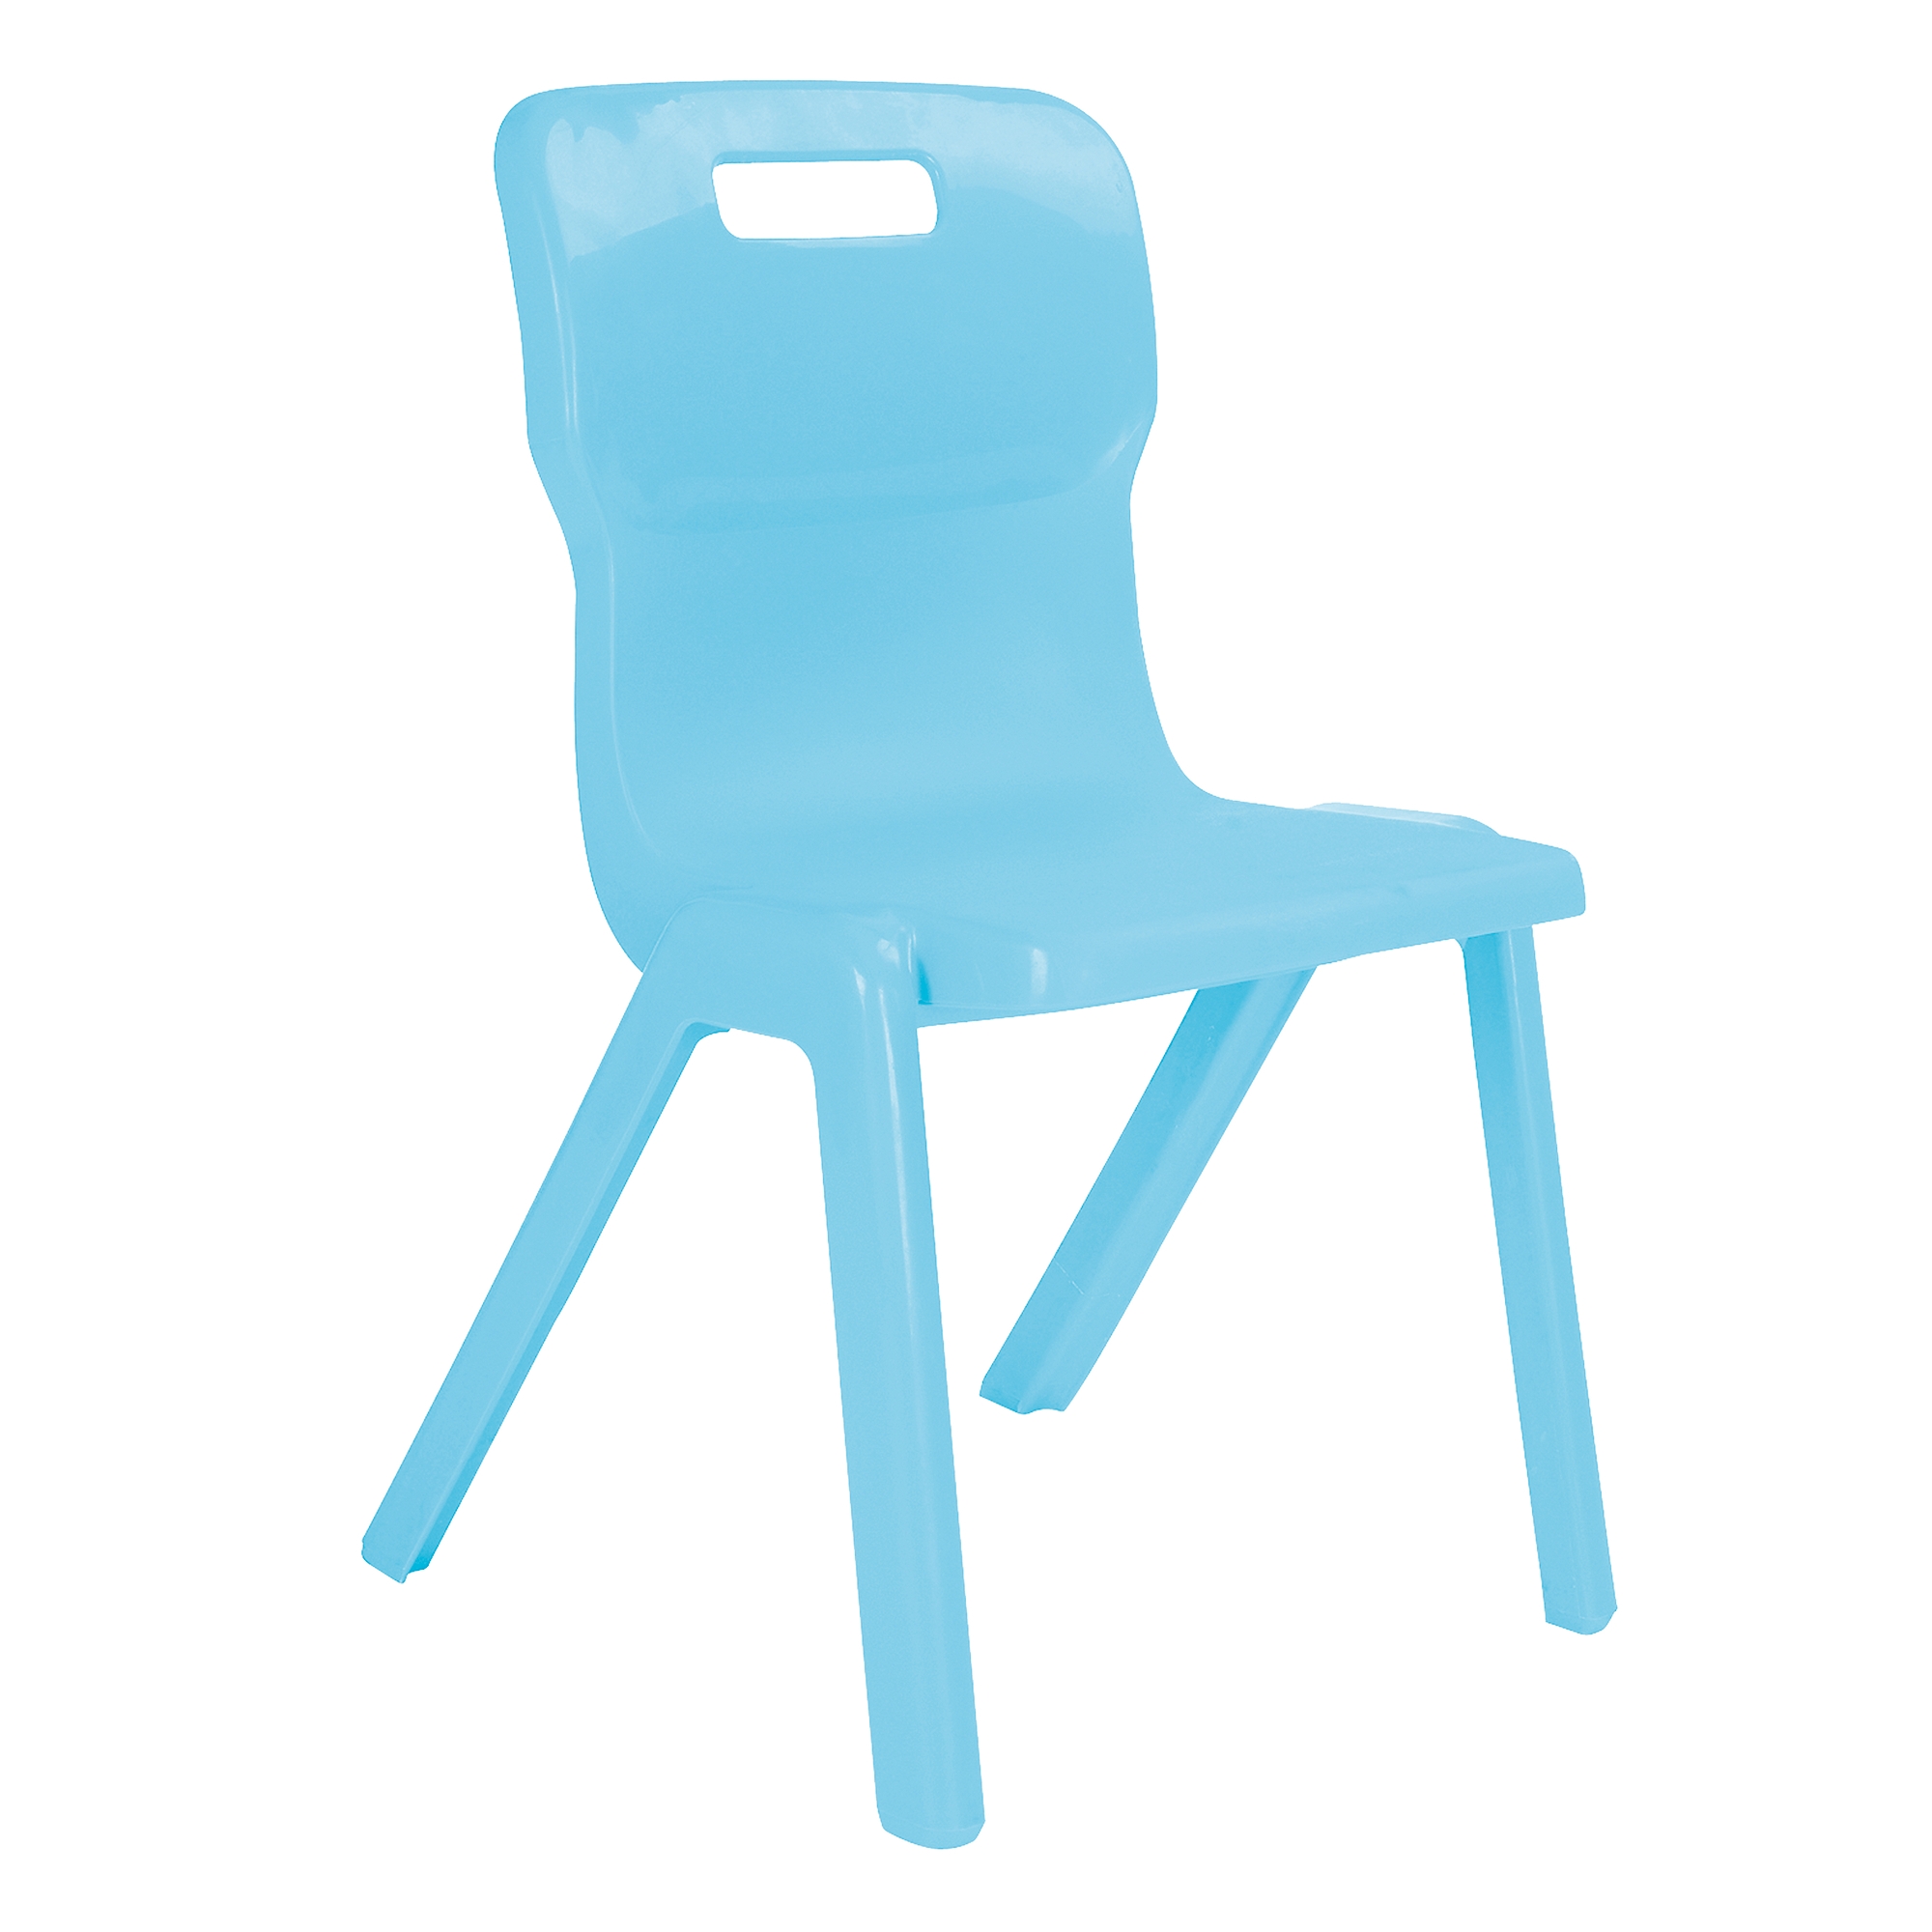 One Piece Titan Chair - Size 5 Ages 11-14 Charcoal